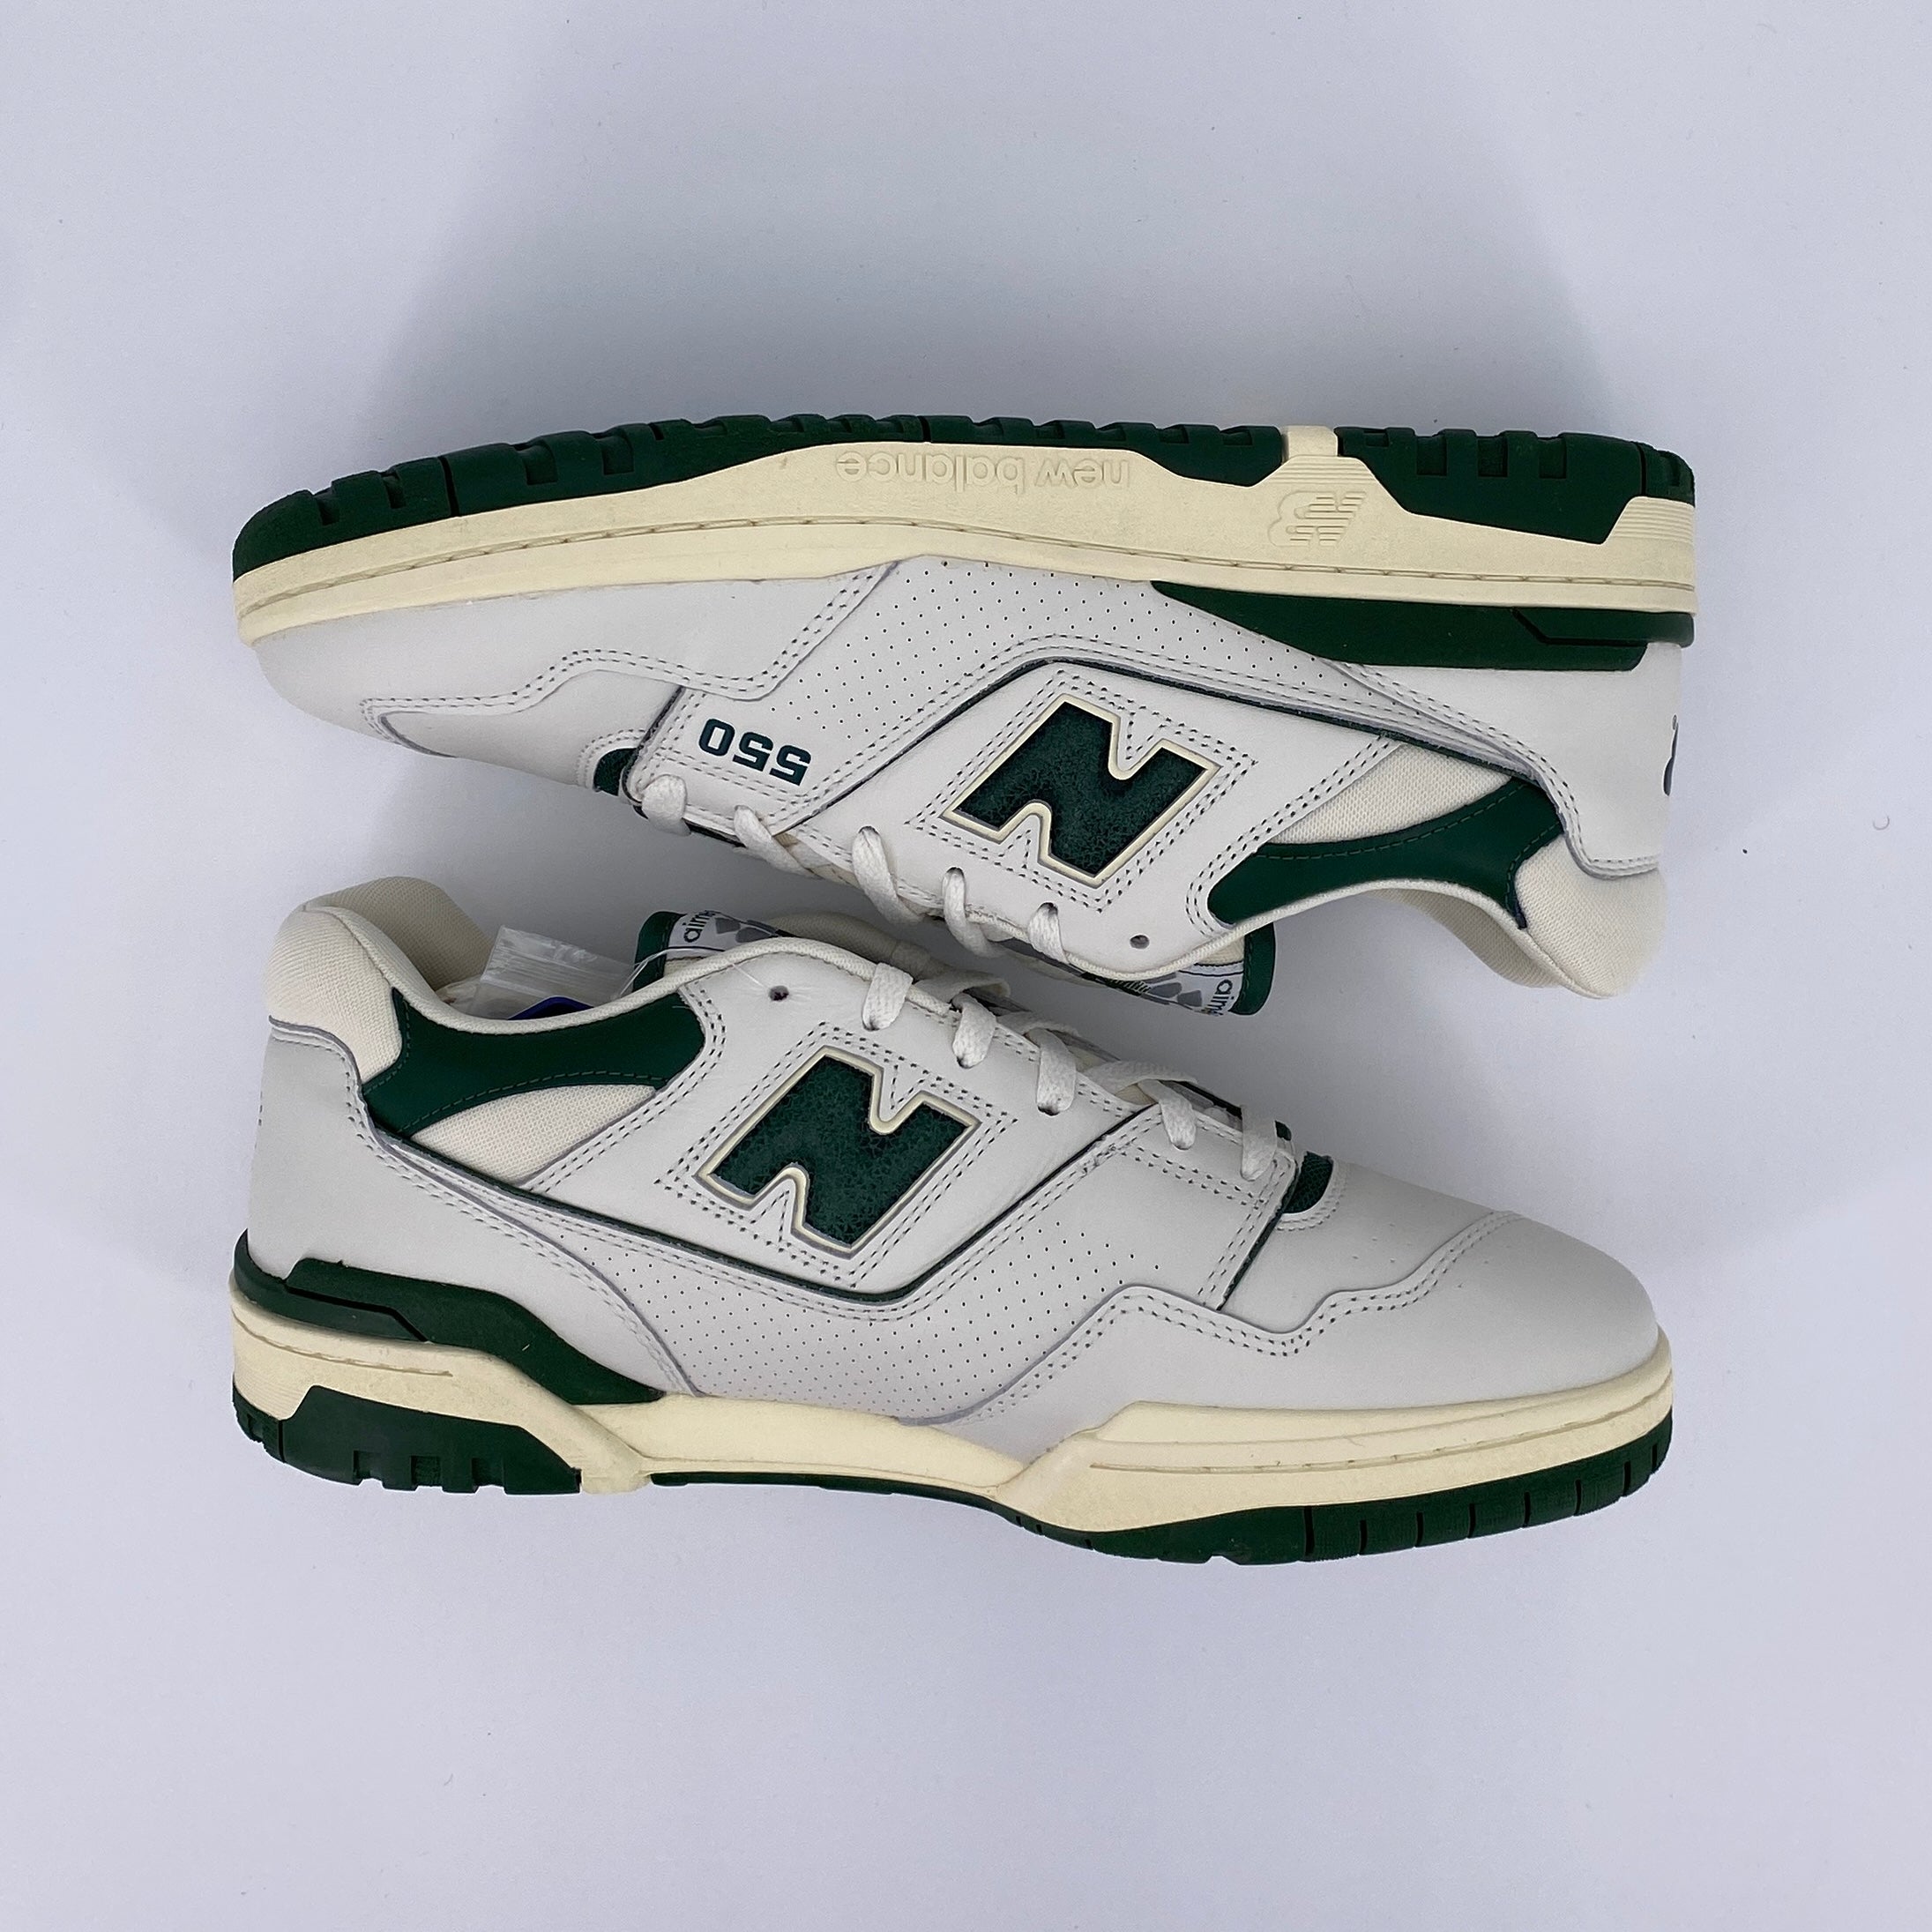 New Balance 550 / ALD &quot;White Green&quot; 2020 New Size 12